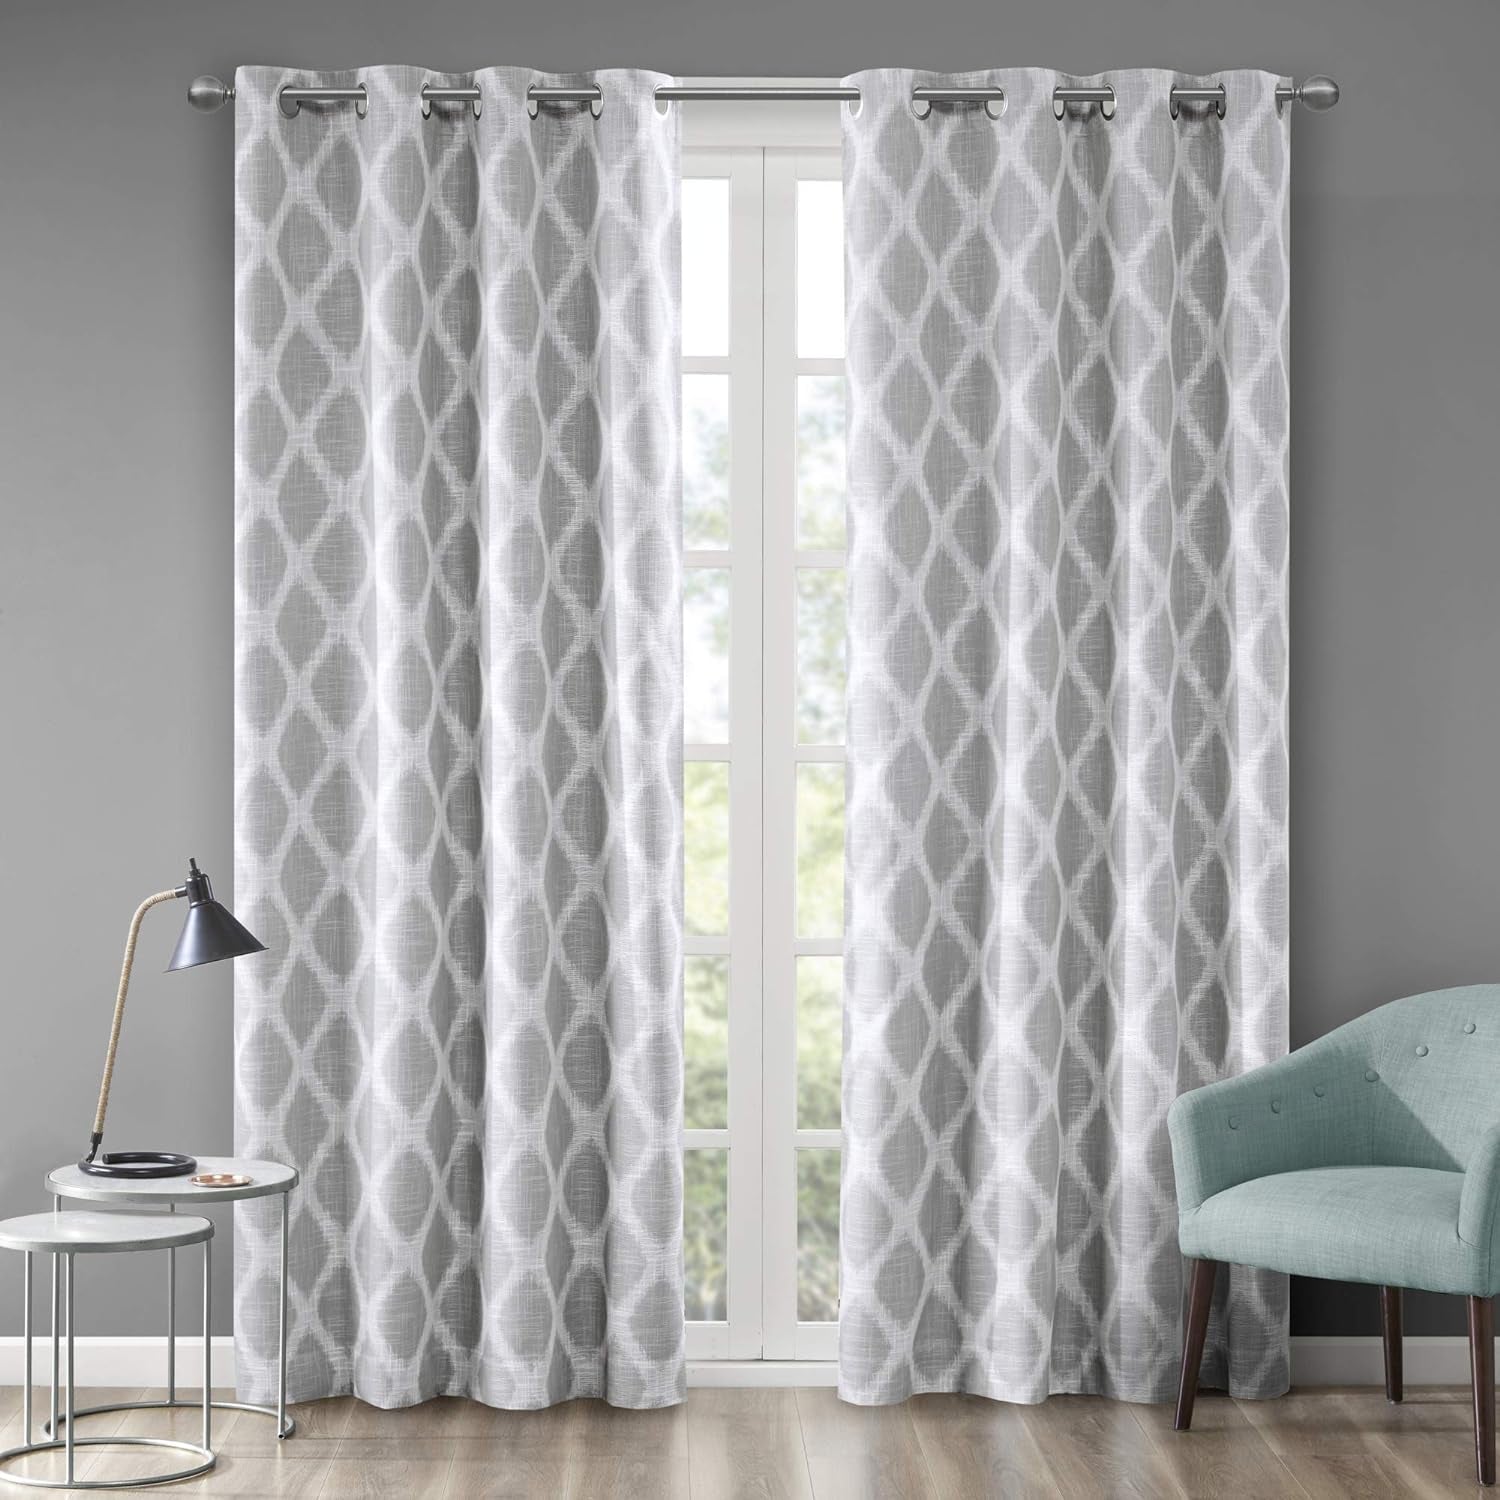 Sun Smart Blakesly Blackout Curtains Patio Window, Ikat Print, Grommet Top Living Room Decor, Living Room Decor, Thermal Insulated Light Blocking Drape for Bedroom and Apartments, 50" X 84", Grey  E&E Co. Ltd DBA JLA Home   